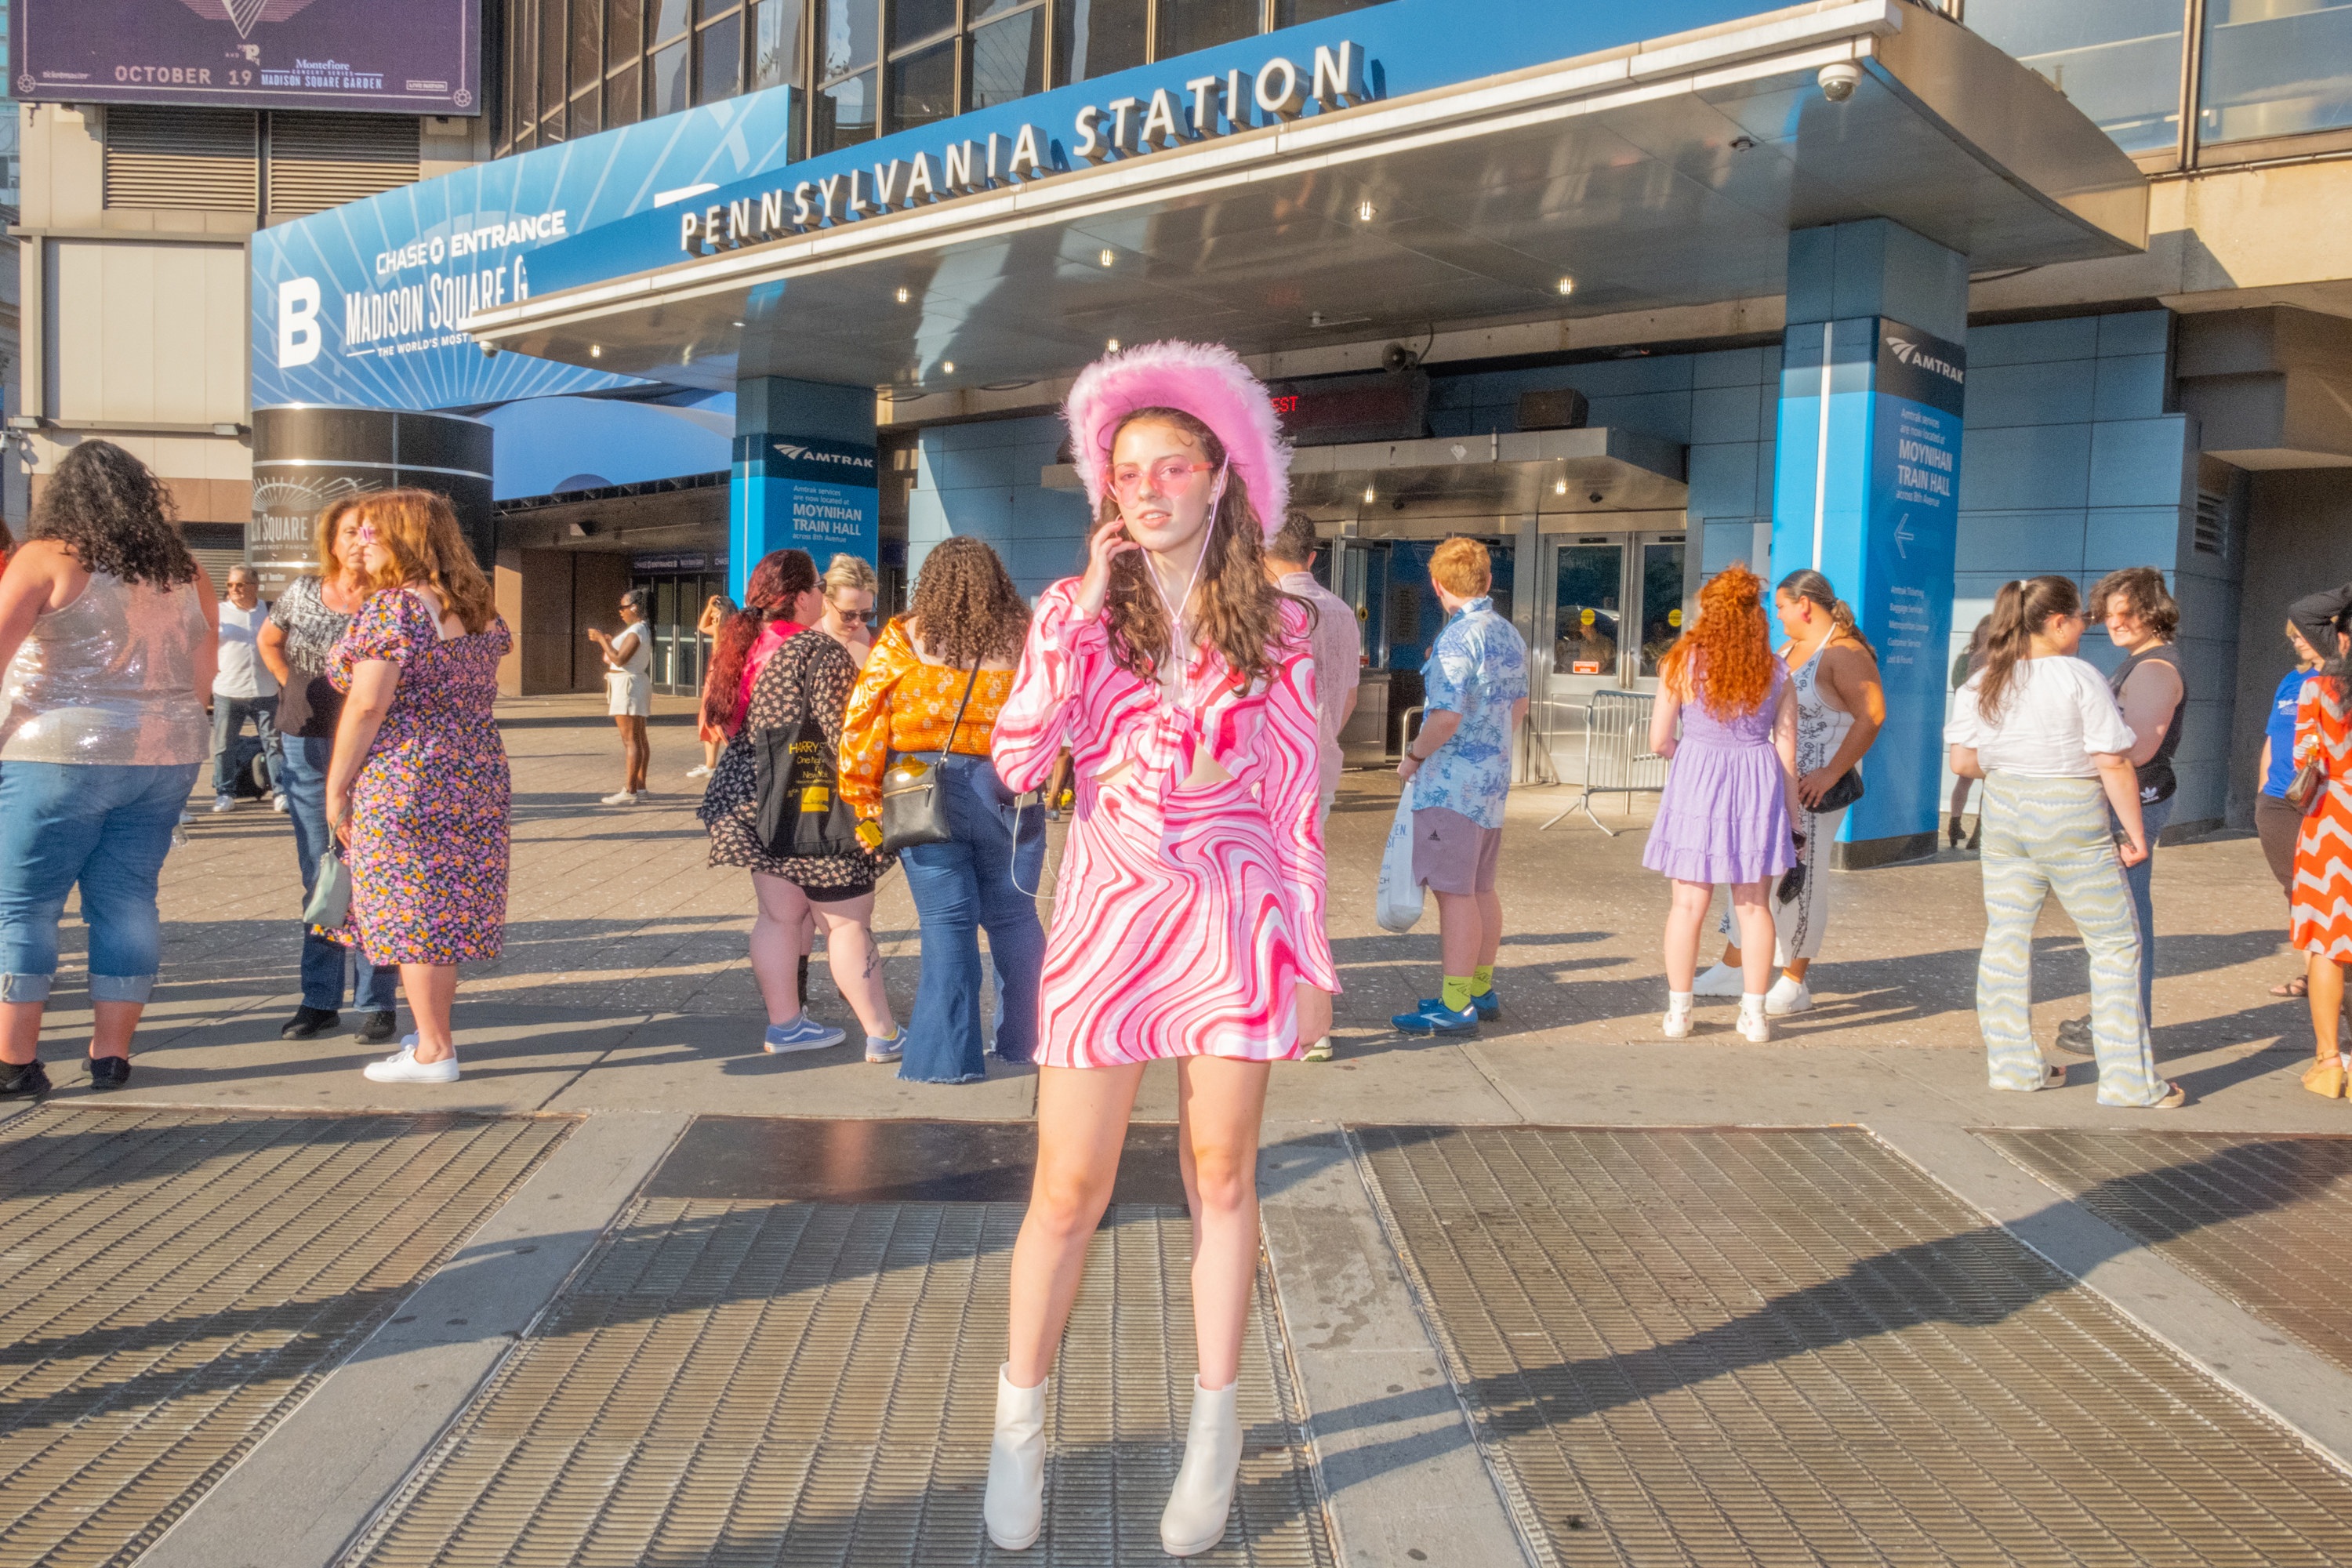 A woman wearing a vibrant outfit stands in front of the entrance to Pennsylvania Station